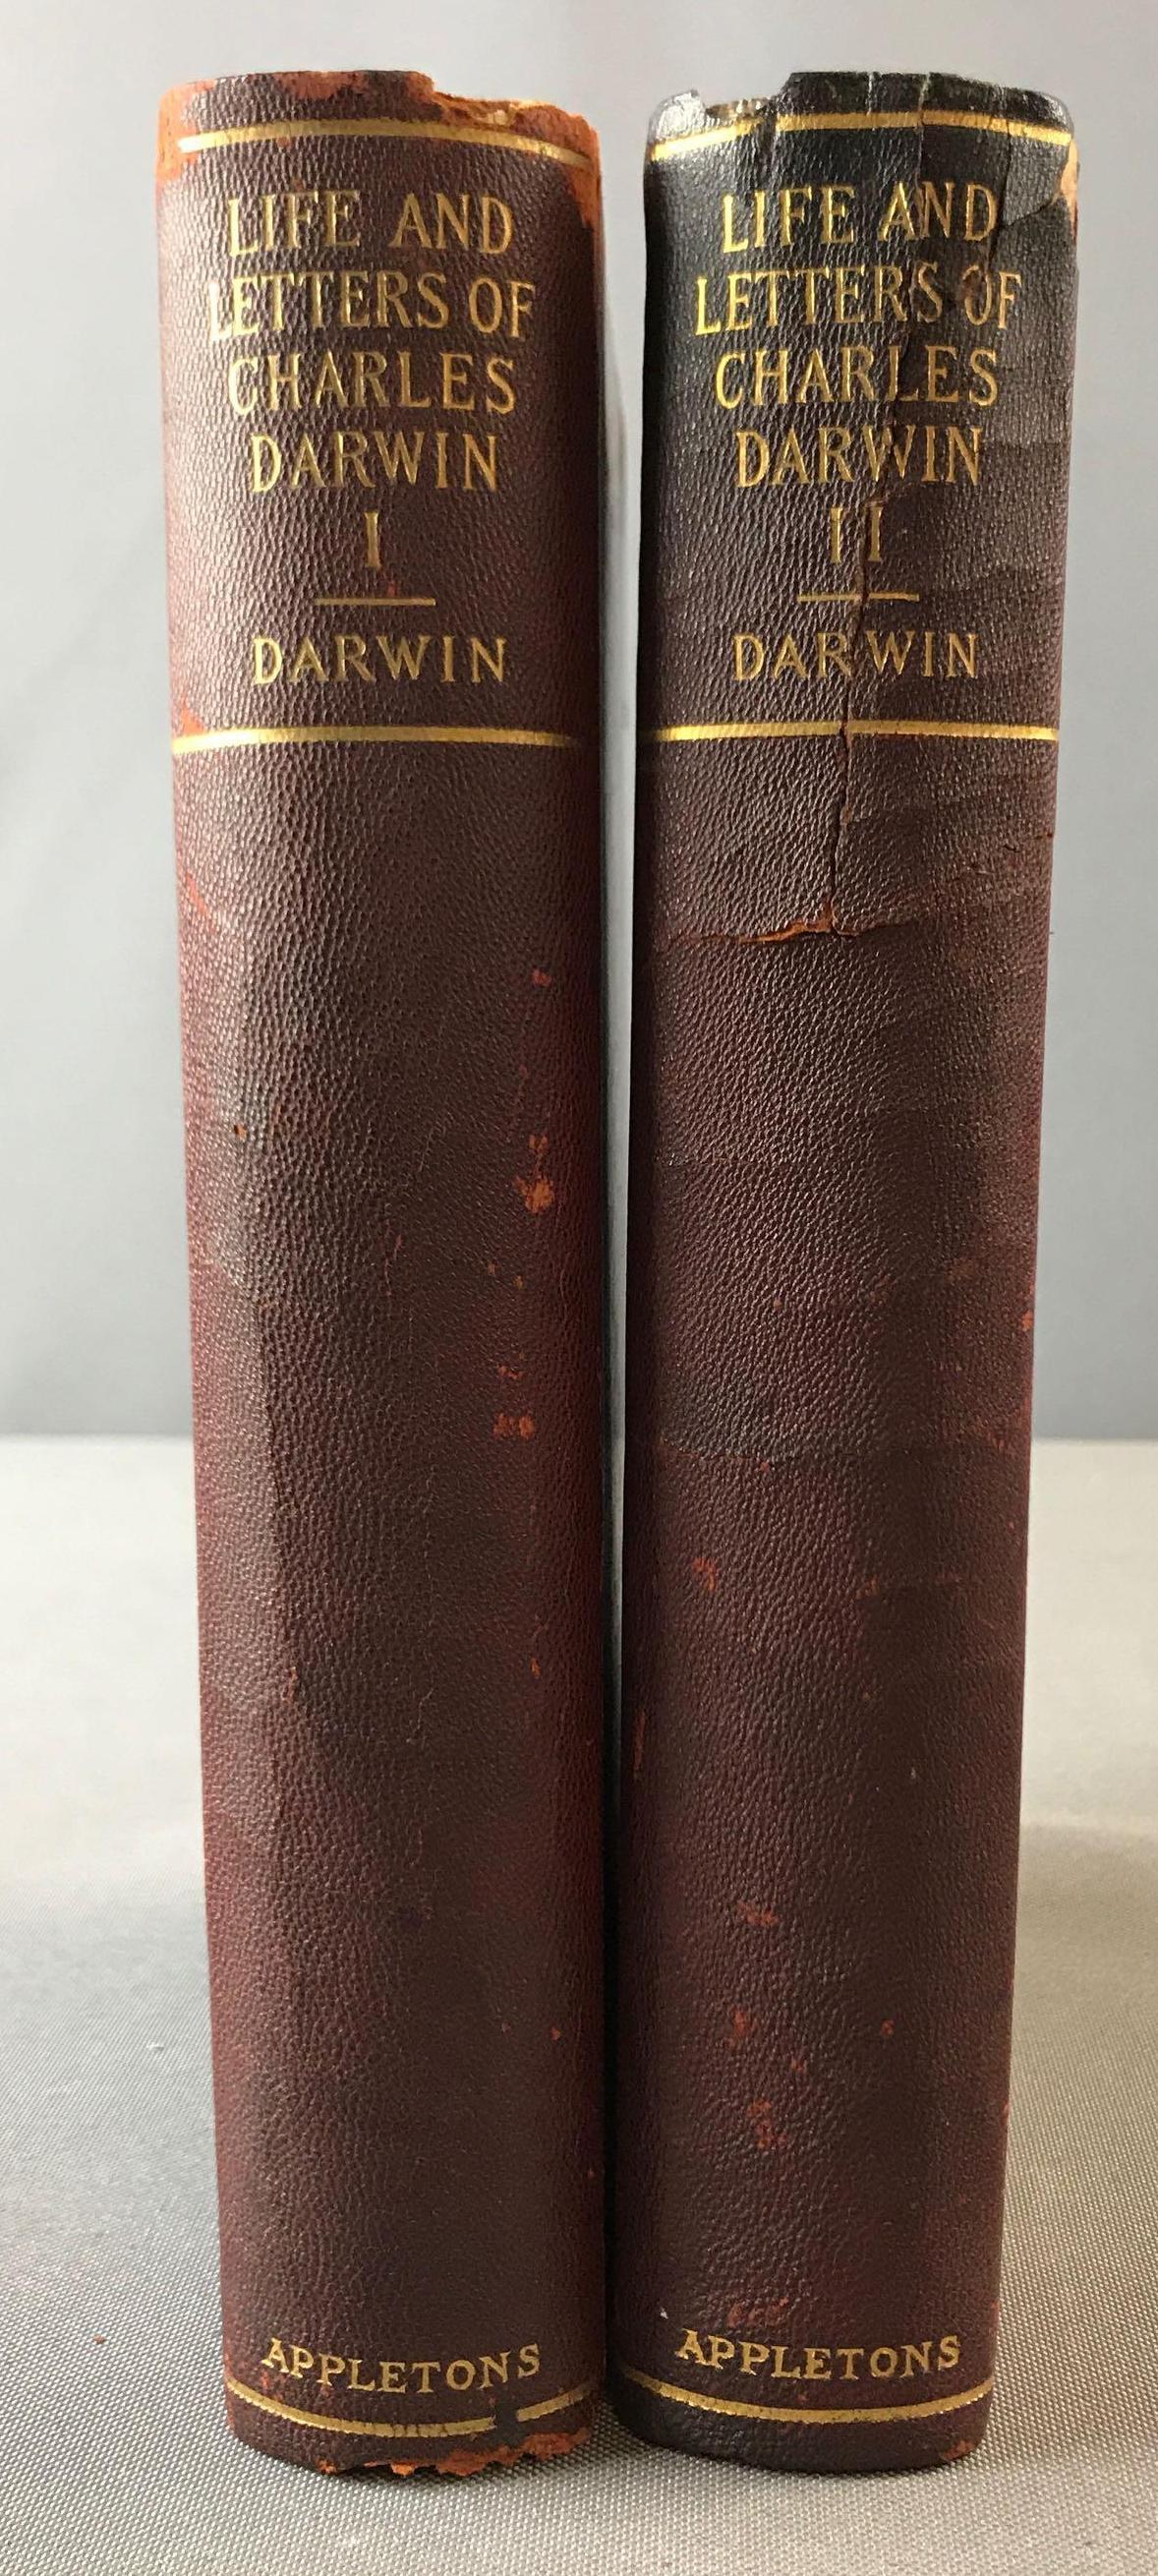 Antique Life and Letters of Charles Darwin 2 volumes